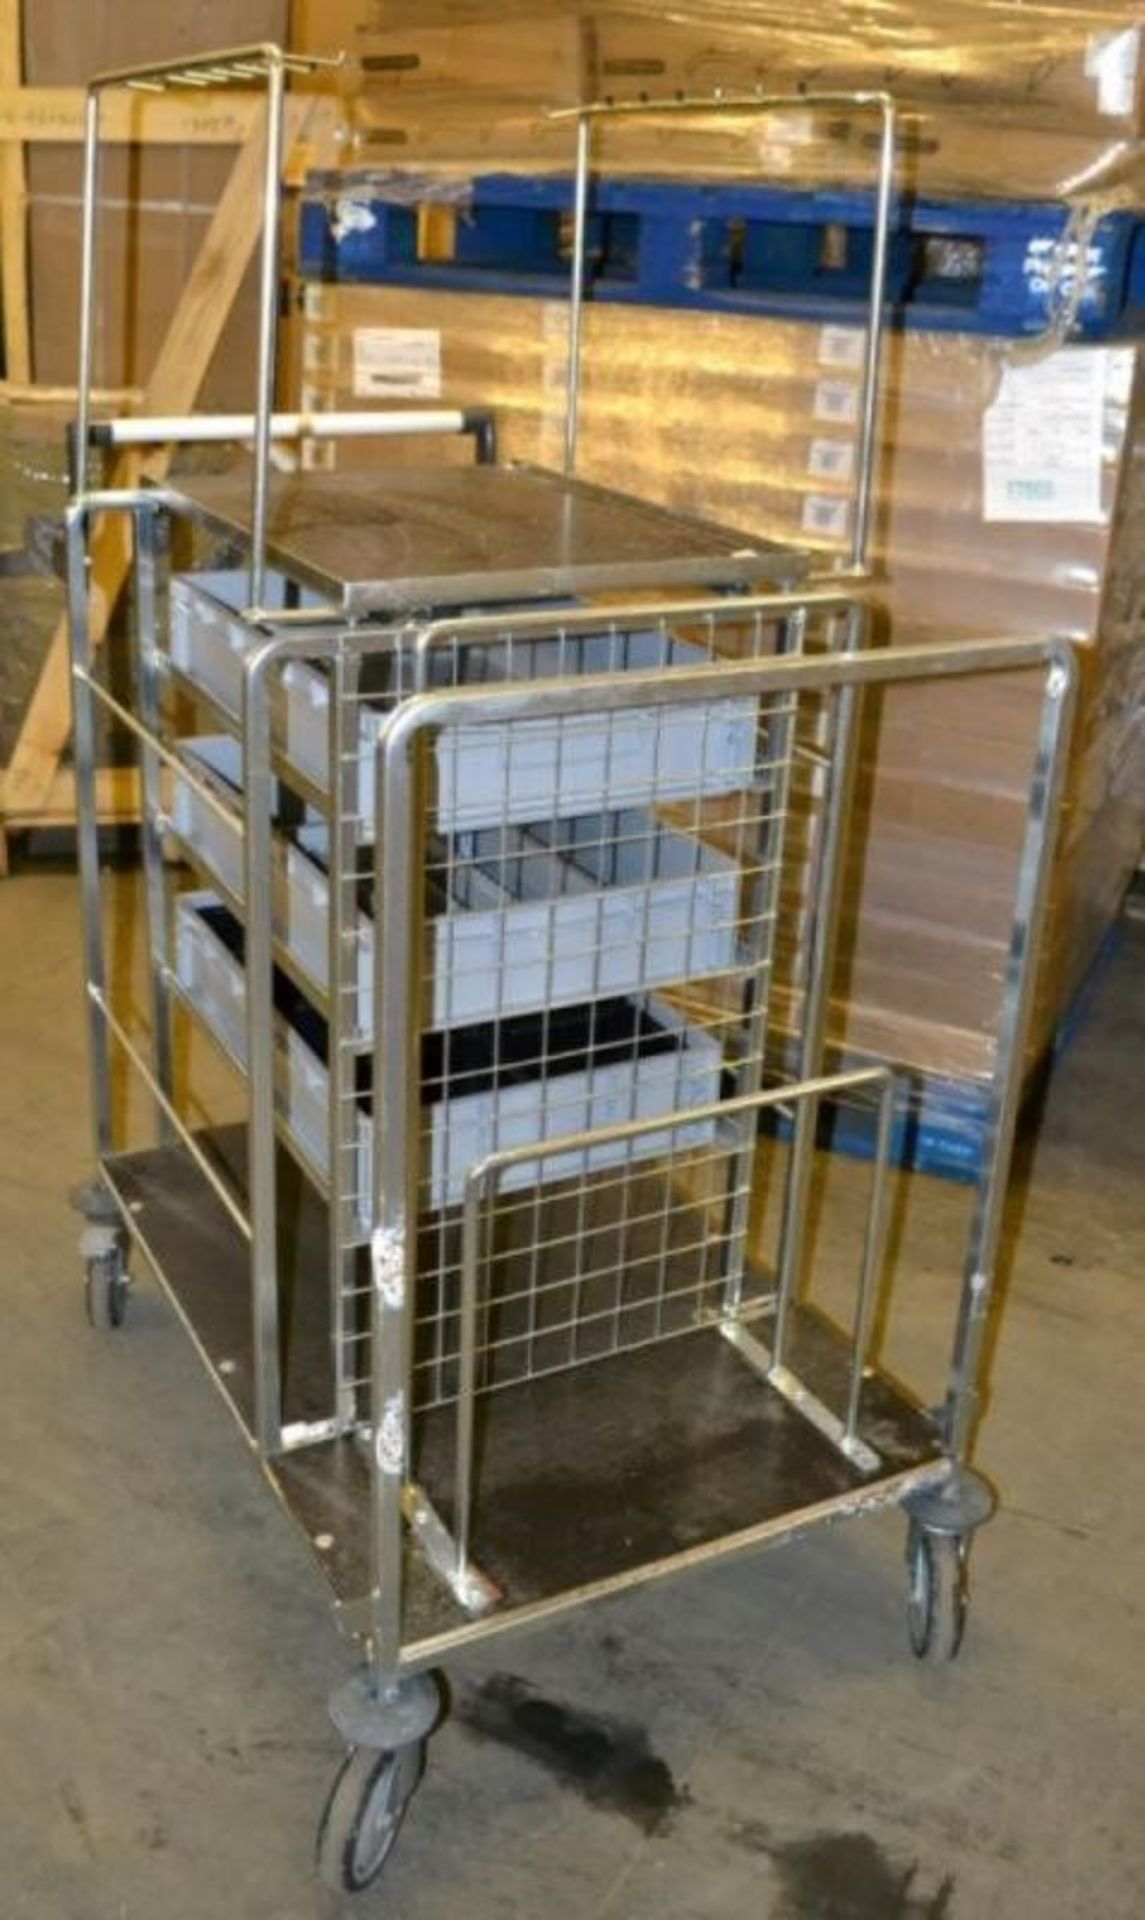 1 x 3-Drawer Warehouse Picking / Transport Trolley - Dimensions: 103 x 64 x 144cm - Ref: MC122 - CL2 - Image 5 of 7